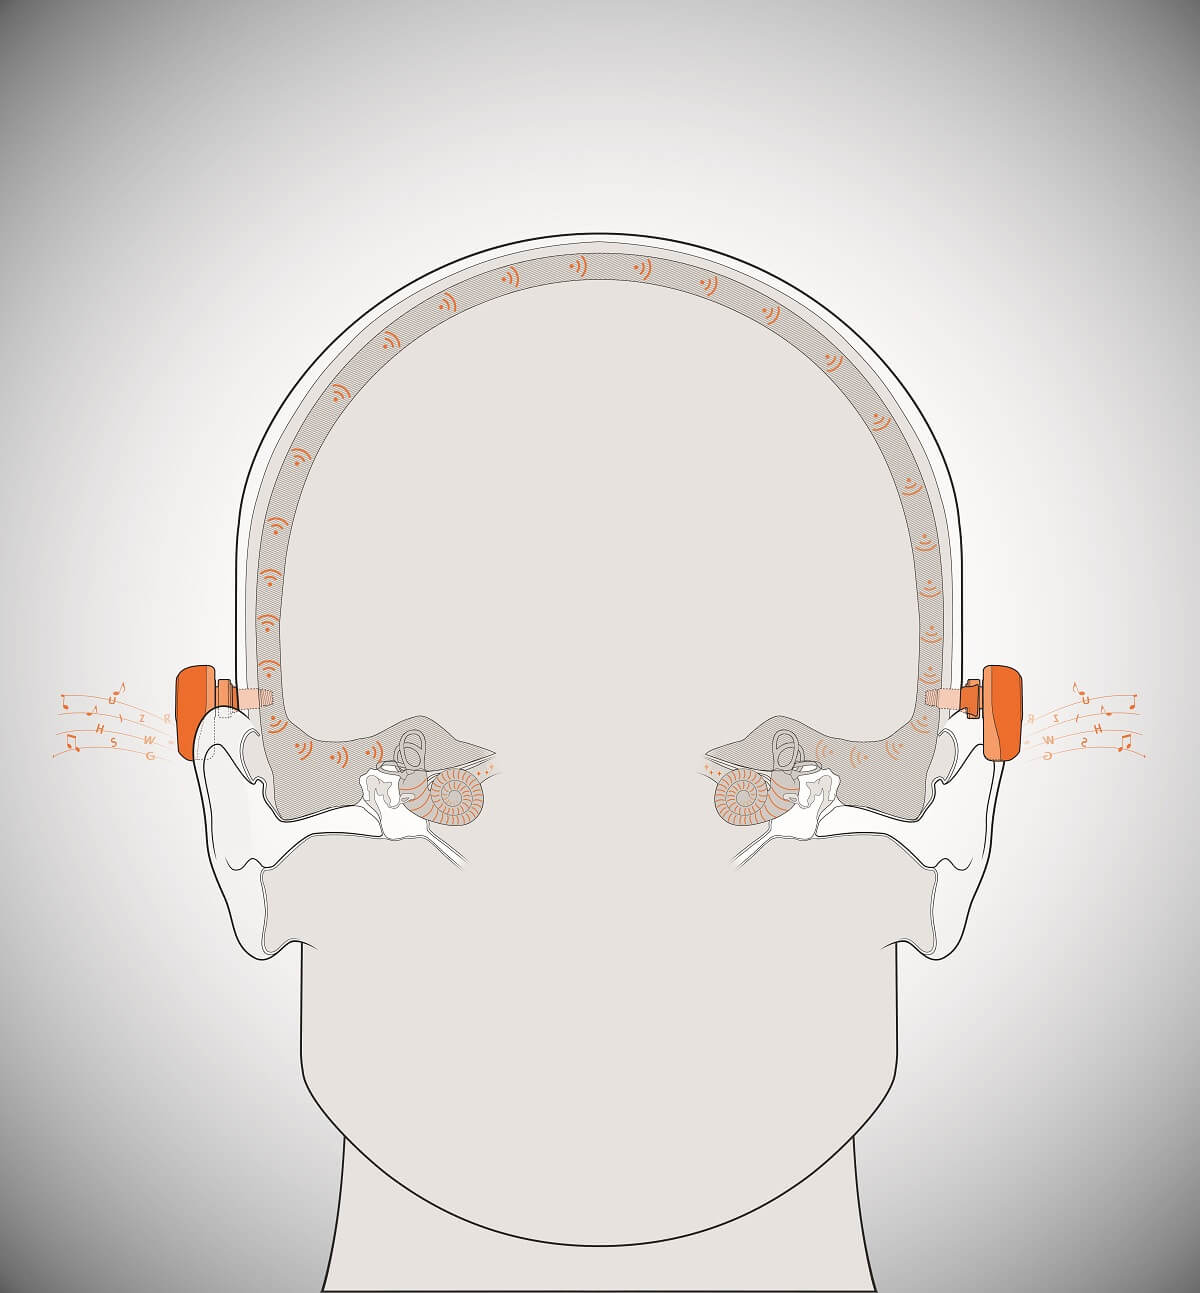 depiction of sound transmitting from the BAHS to the inner ear